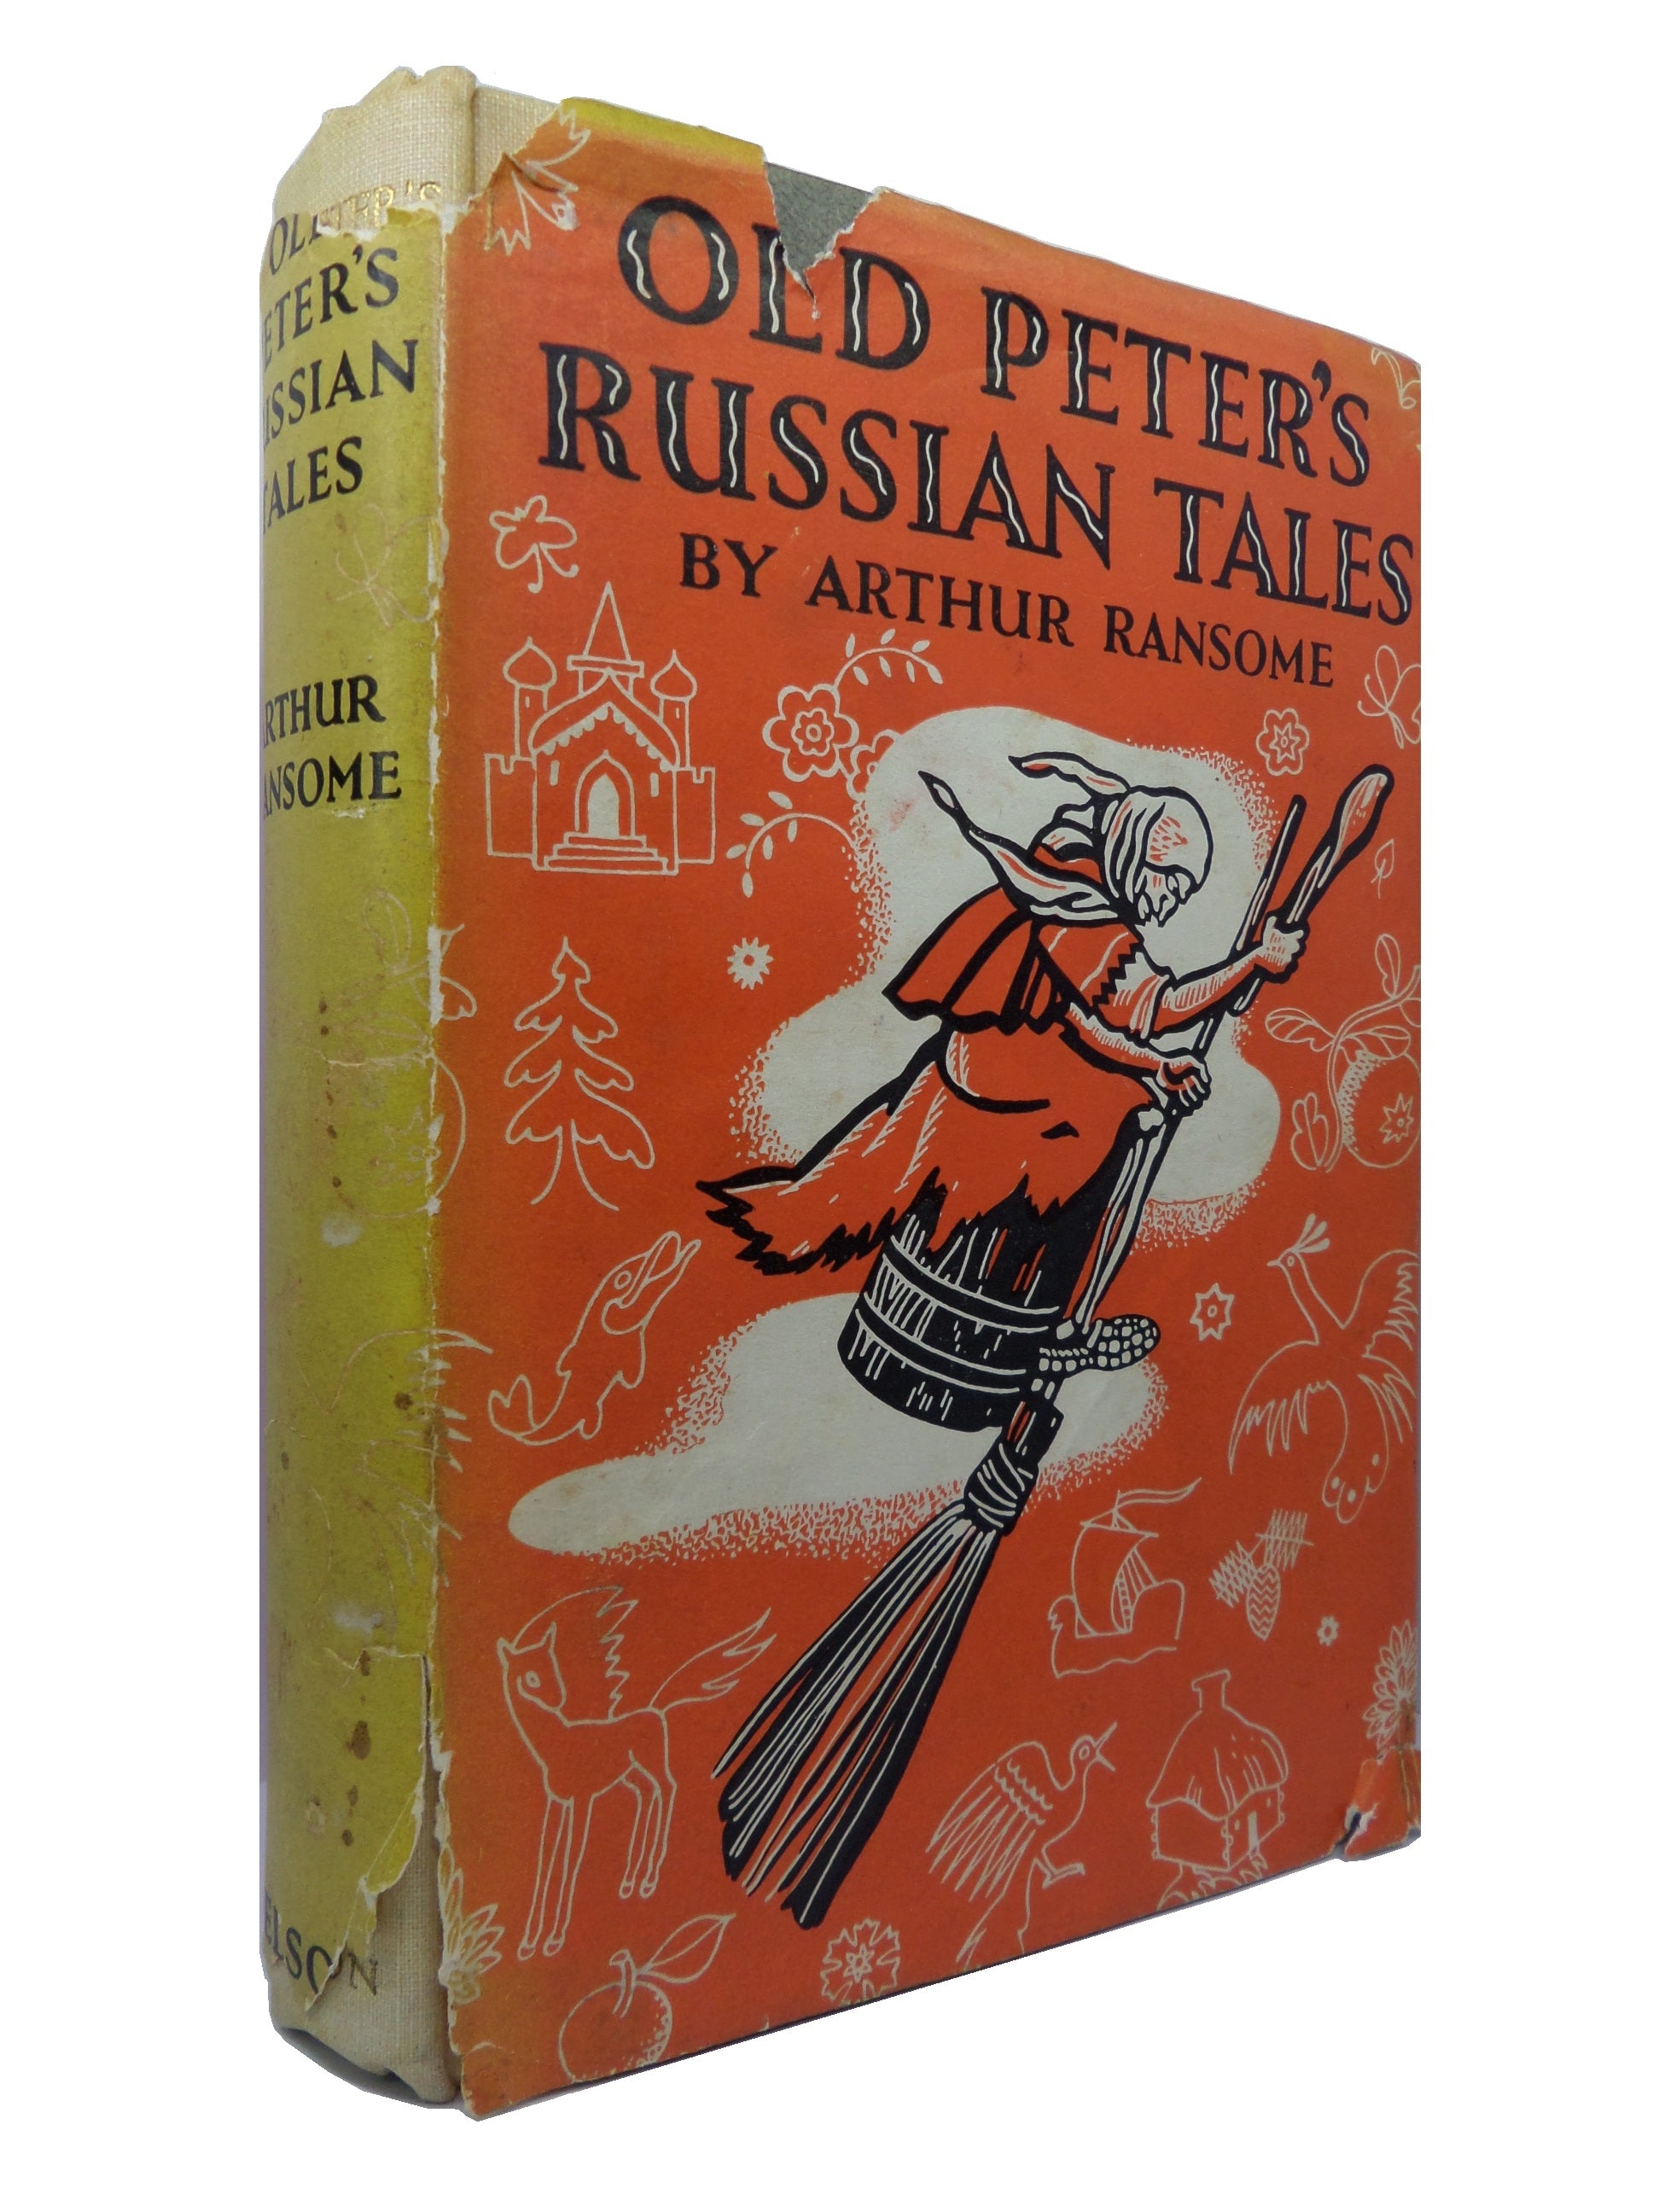 OLD PETER'S RUSSIAN TALES BY ARTHUR RANSOME 1938